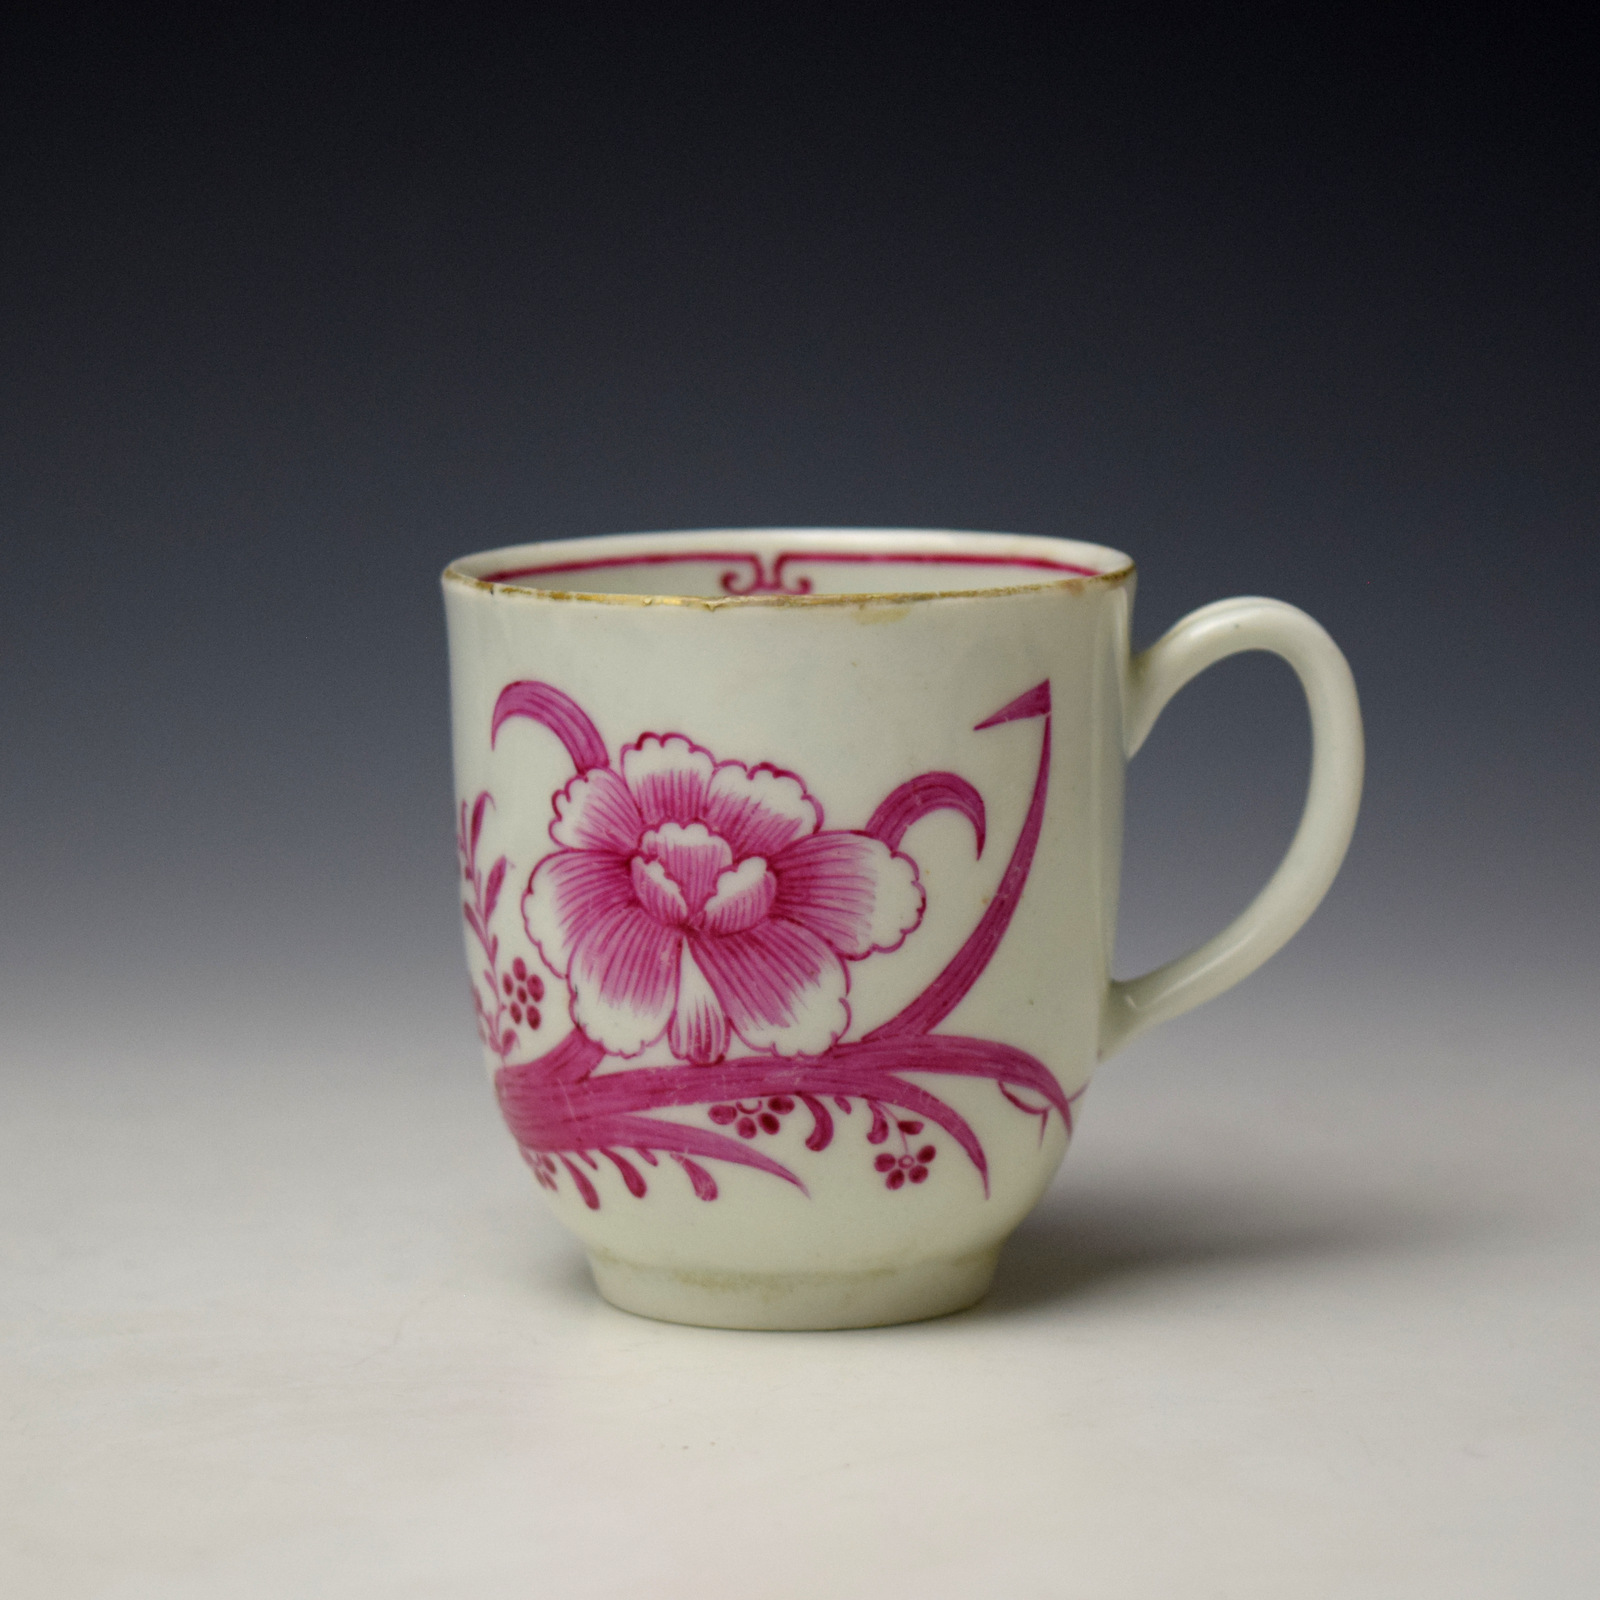 Puce Monochrome Floral Pattern Coffee Cup c1765-70 Ex Vanzoi Lin Collection